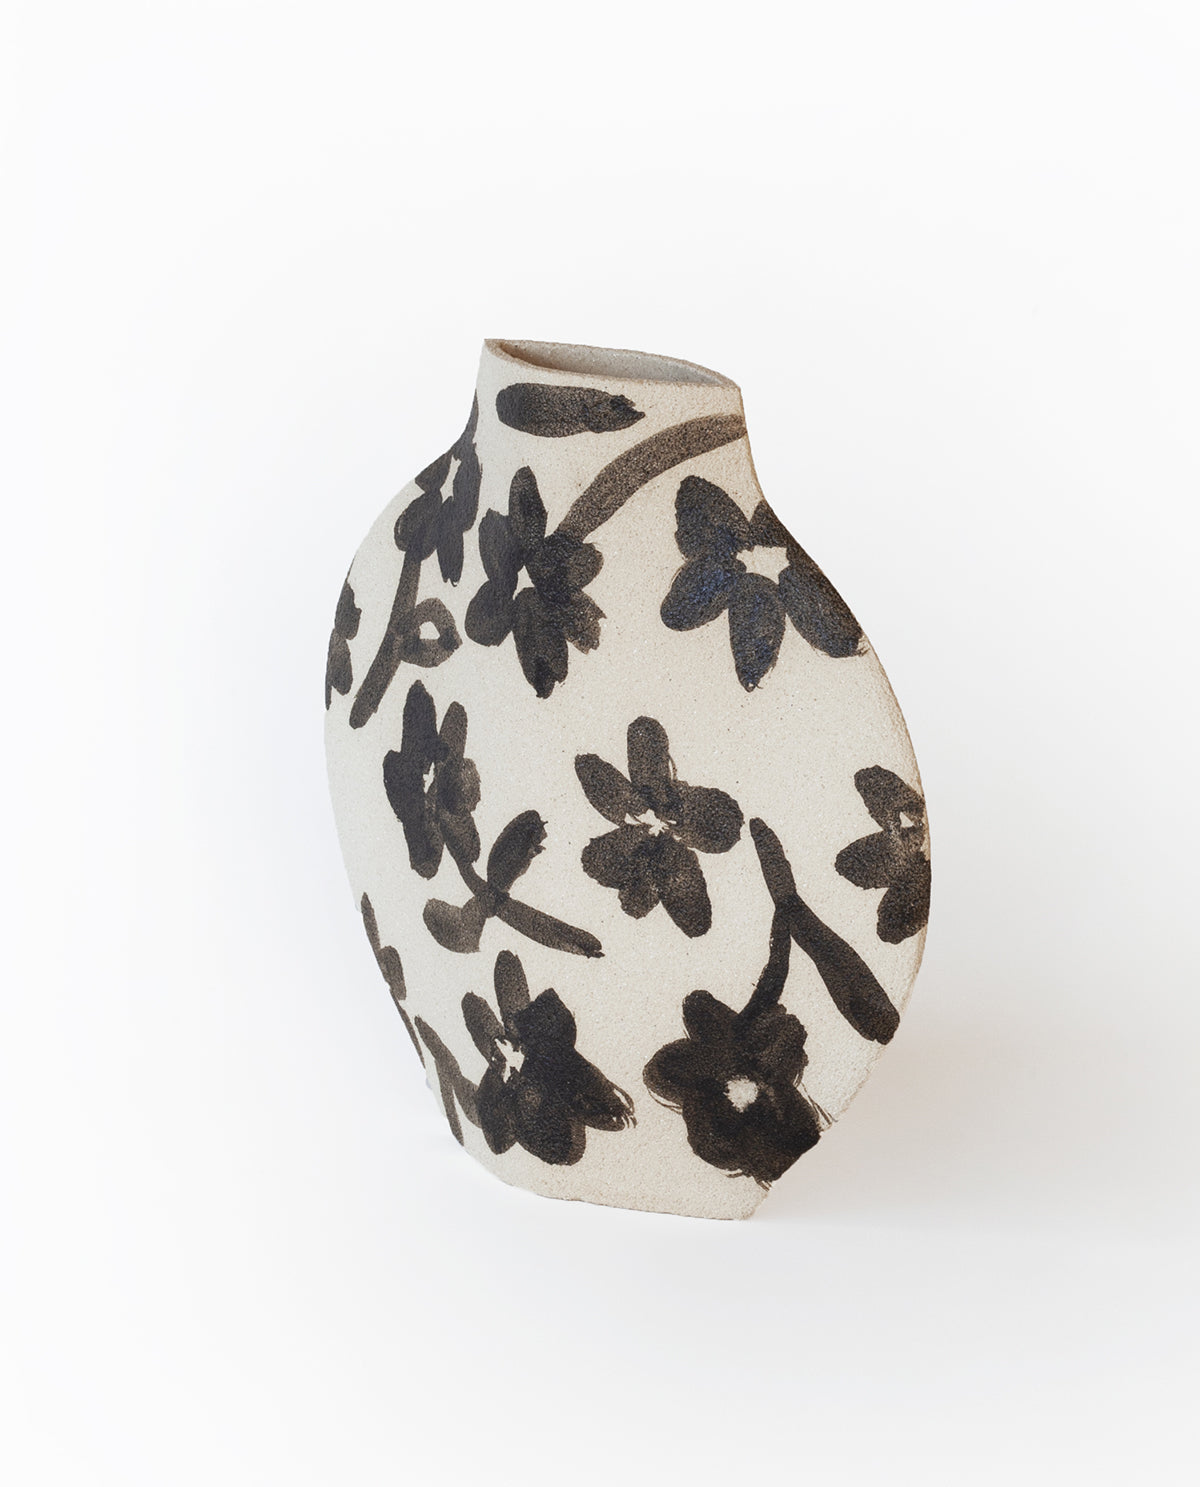 Hand-painted floral vase by INI CERAMIQUE with flowers patterns and textured finish